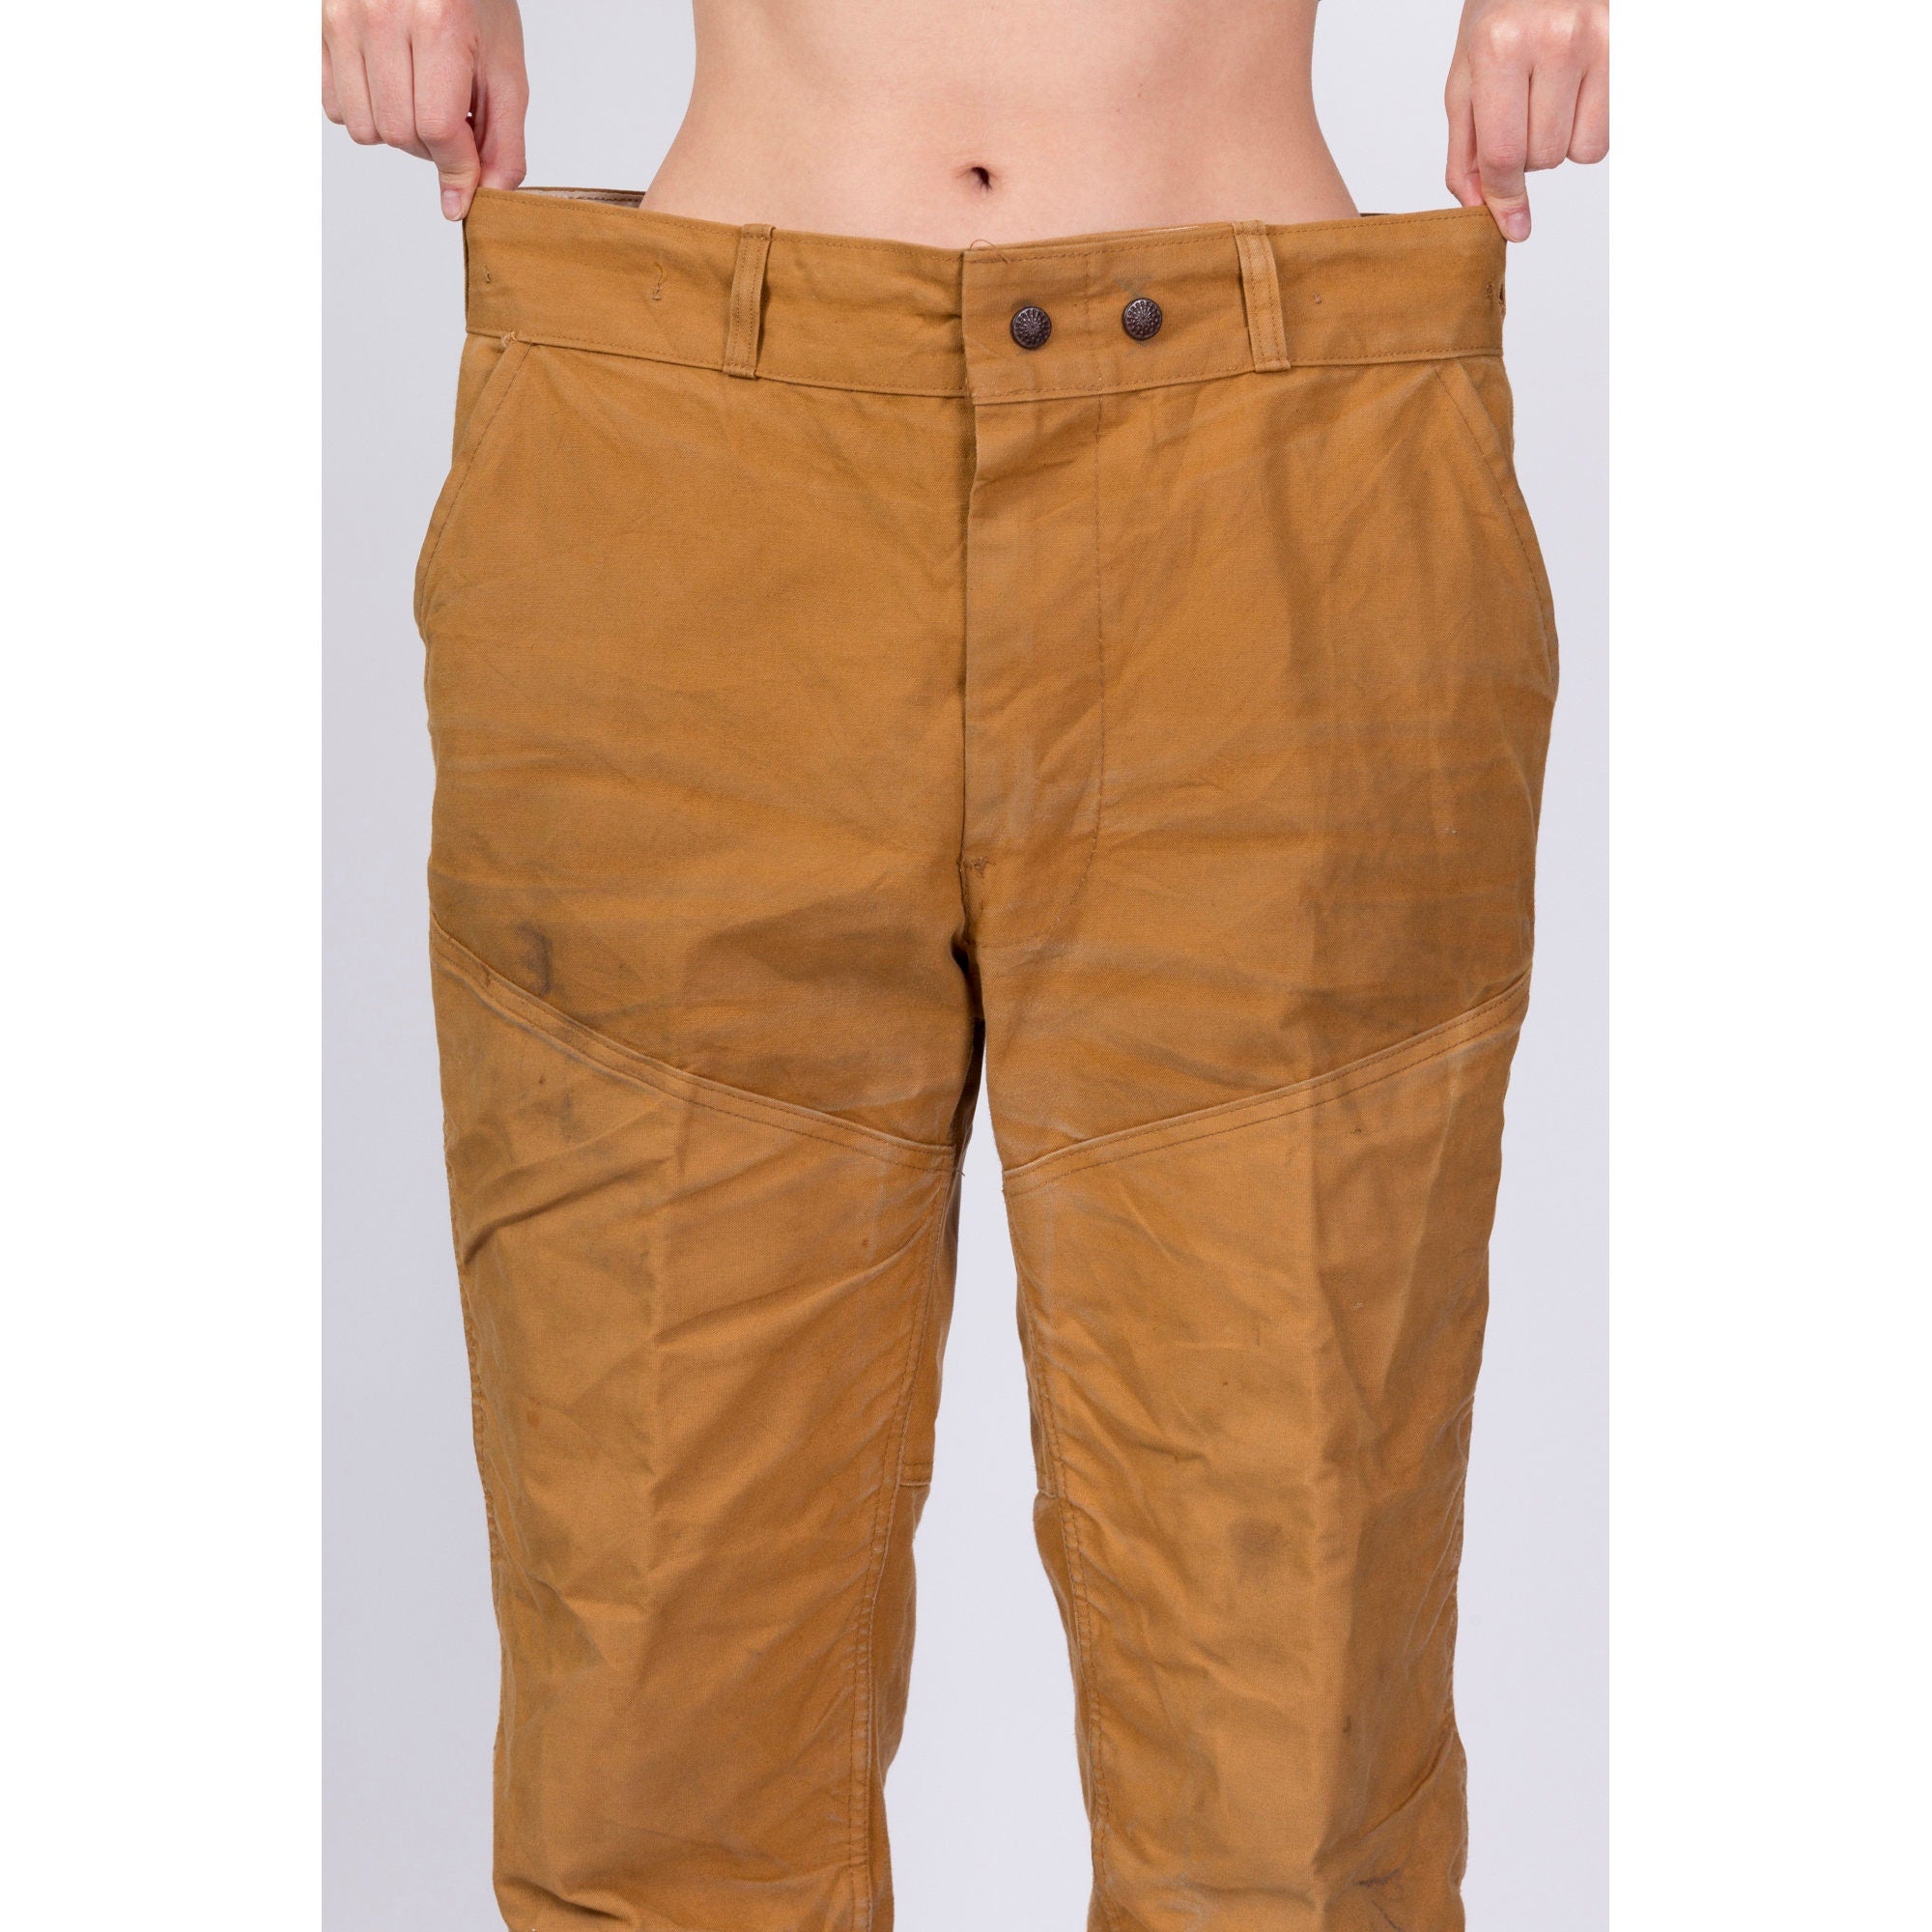 Pants & Bottoms | Advanced Hunting Gear for Innovative Comfort